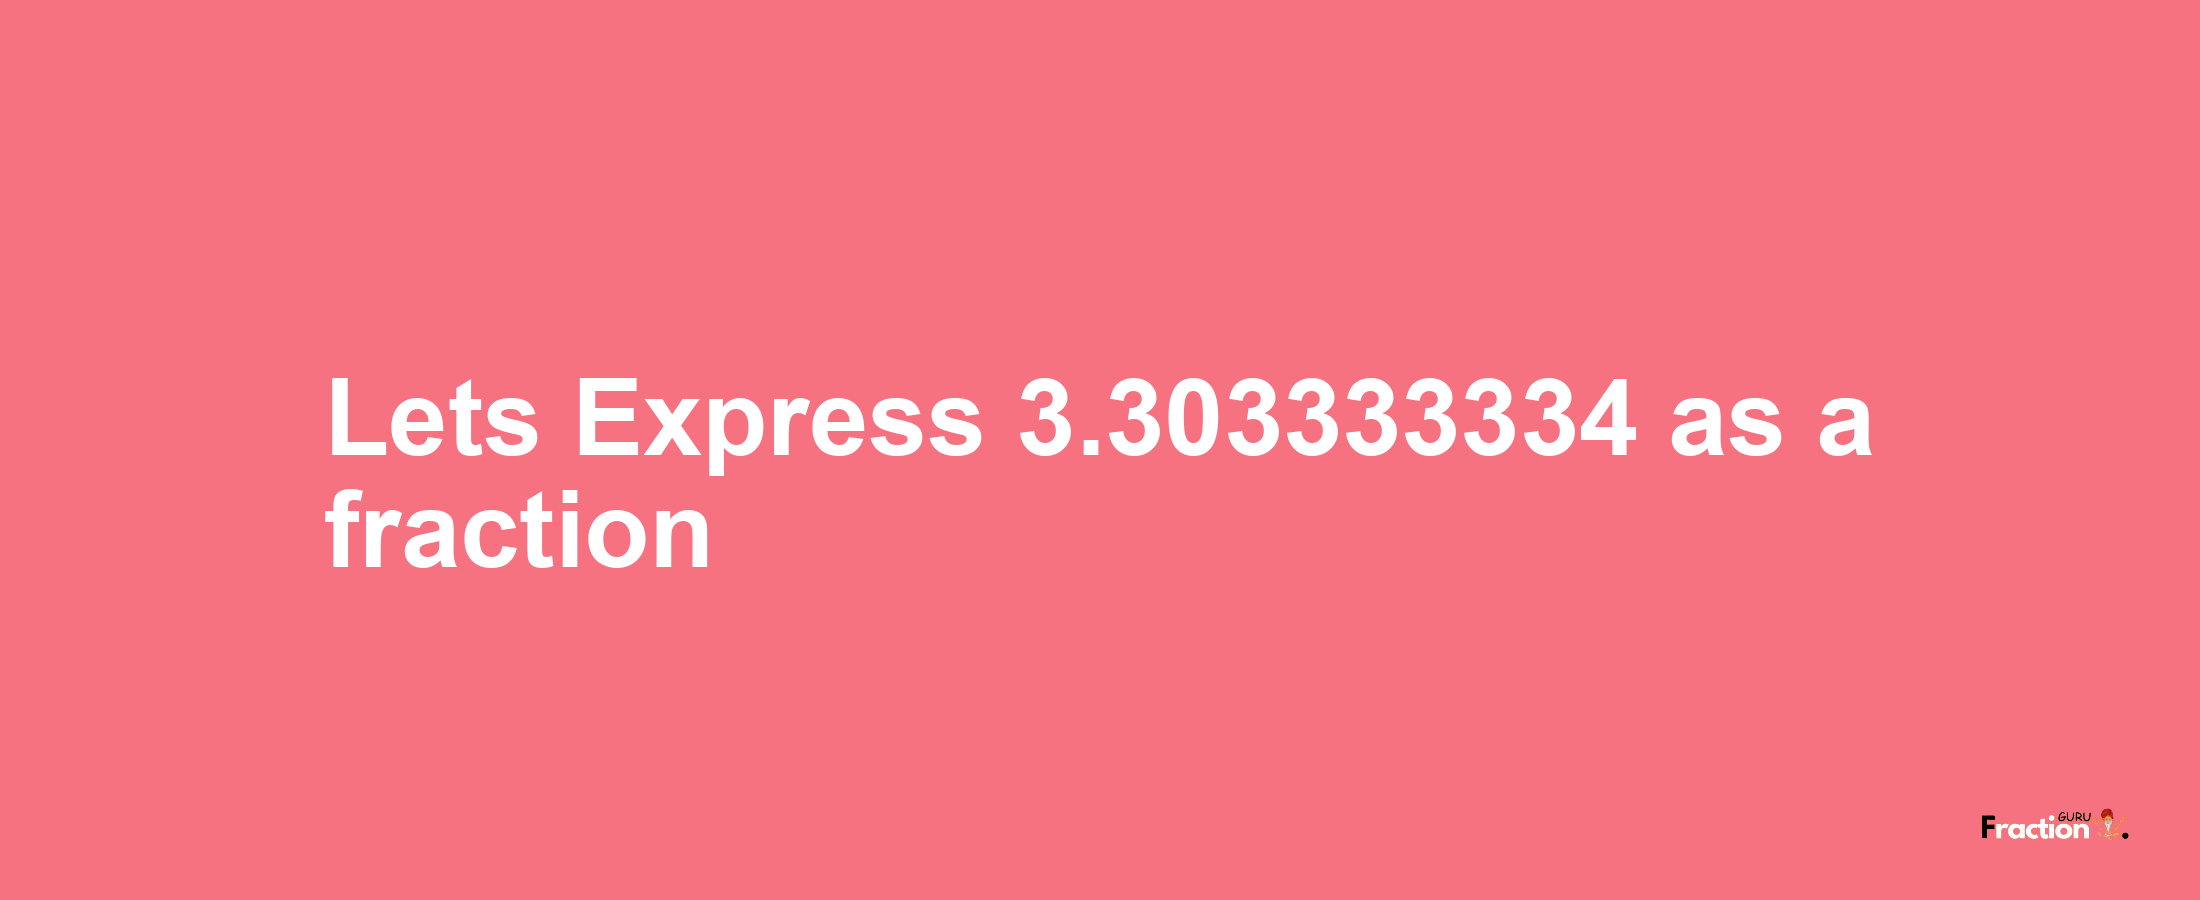 Lets Express 3.303333334 as afraction